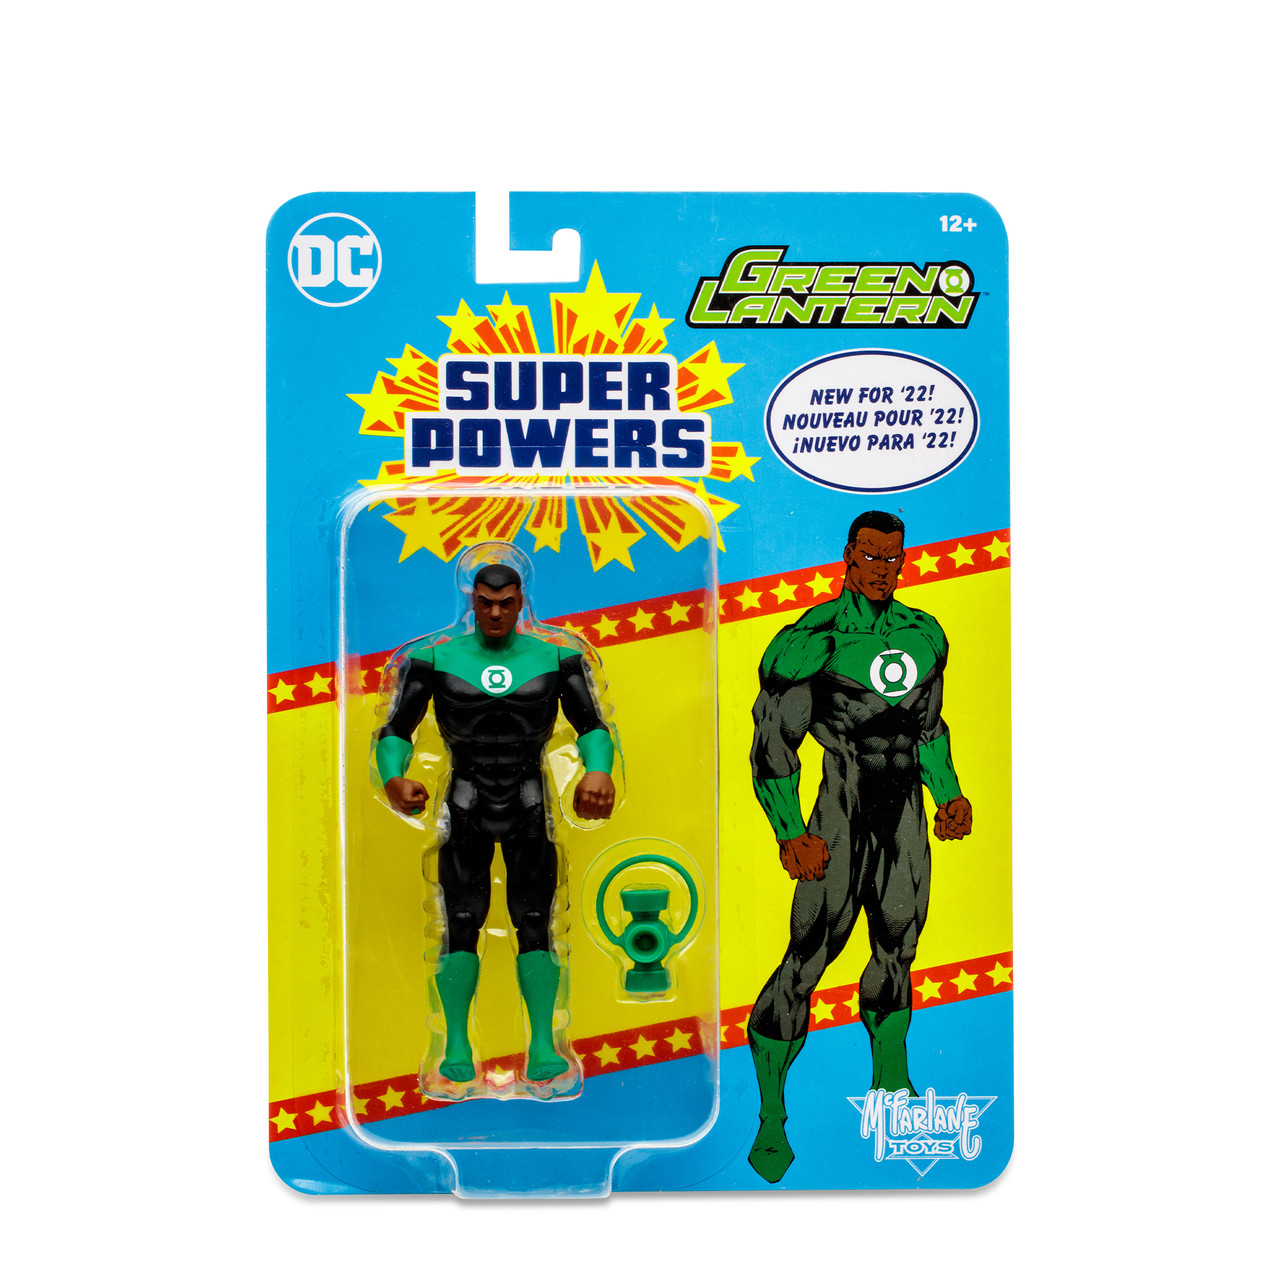 Фигурка McFarlane Toys Green Lantern DC Super Powers 12 см MF15768 new dm 1 64 scale pajero super exceed diecast car model by diecast masters for collection gift green